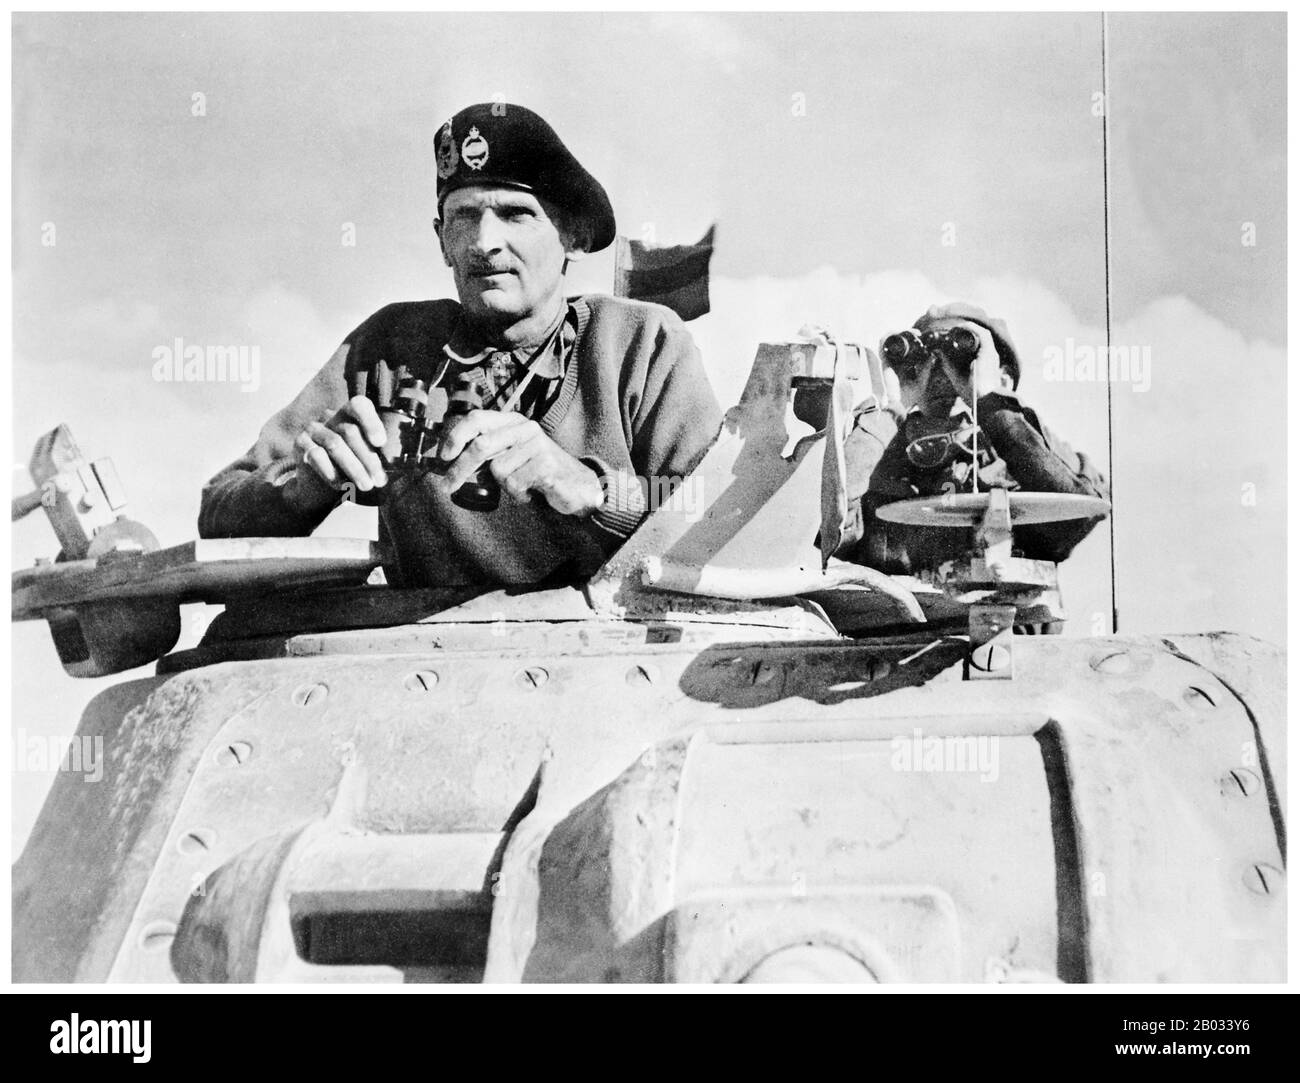 The Second Battle of El Alamein (23 October–11 November 1942) was a major battle of the Second World War that took place near the Egyptian railway halt of El Alamein.  With the Allies victorious, it marked a major turning point in the Western Desert Campaign of the Second World War.  Field Marshal Bernard Law Montgomery, 1st Viscount Montgomery of Alamein, KG, GCB, DSO, PC (17 November 1887 – 24 March 1976), nicknamed 'Monty' and the 'Spartan General', was a senior officer of the British Army and the victor at El-Alamein. Stock Photo